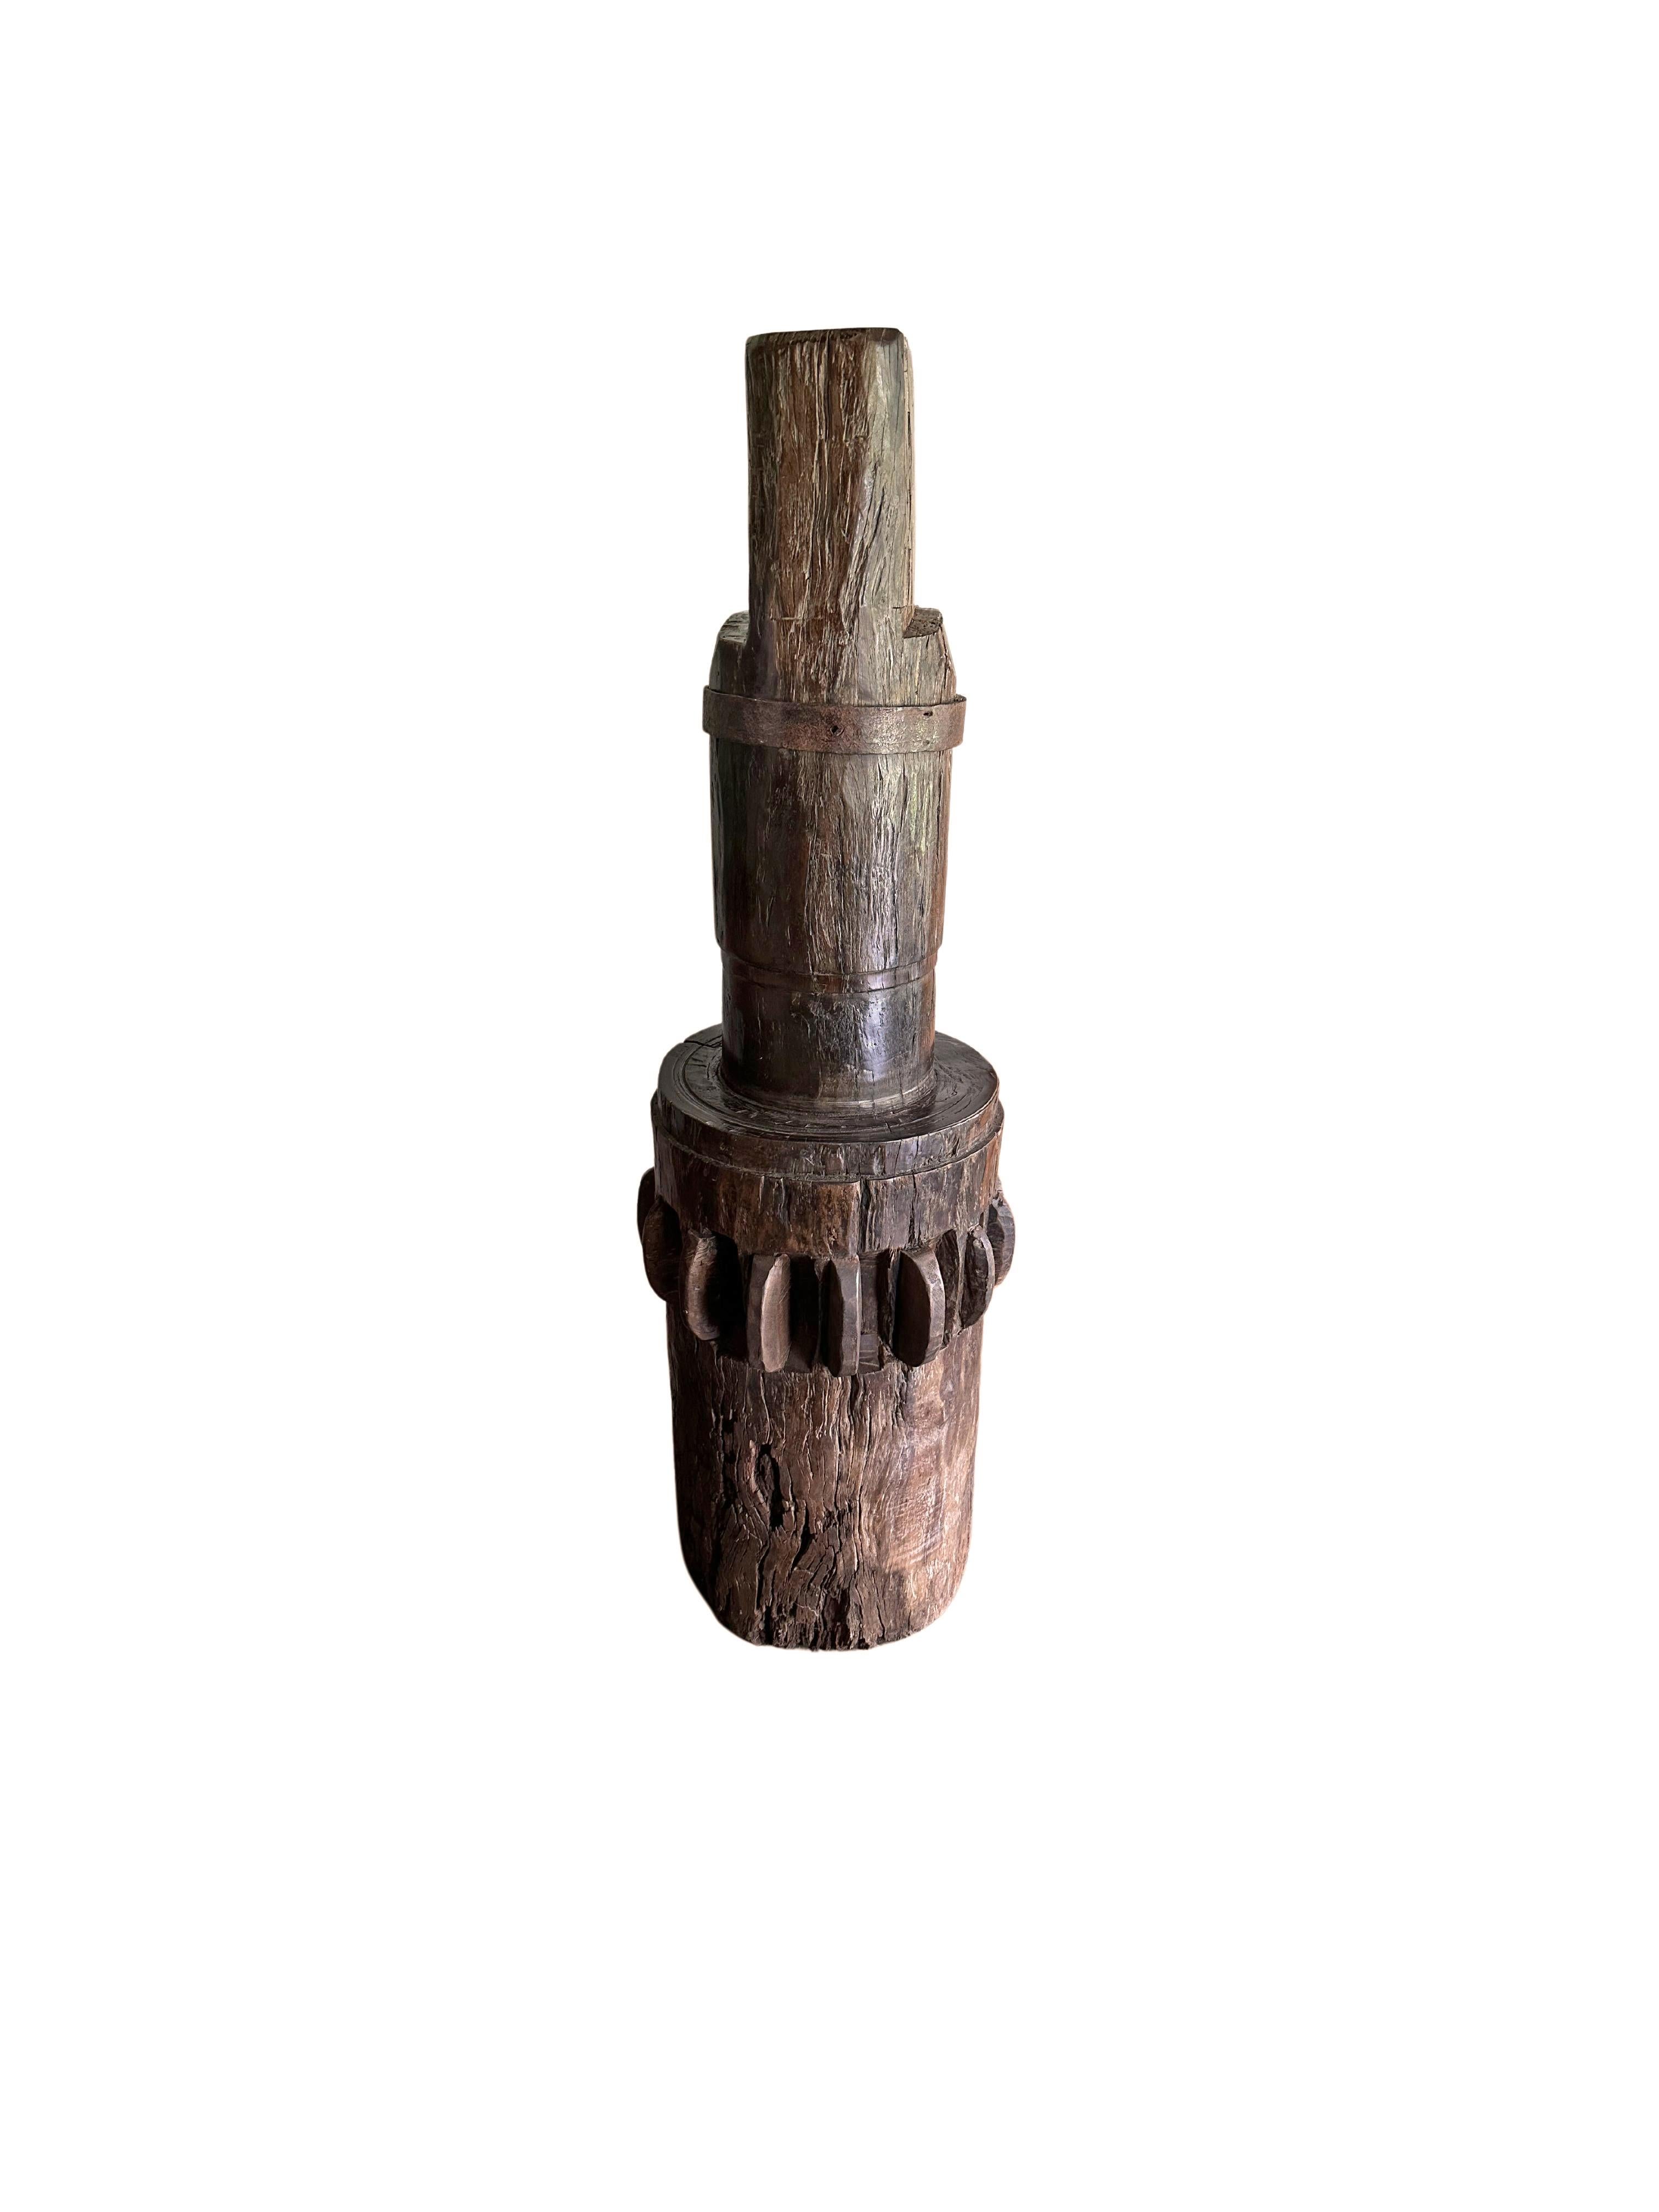 Hand-Crafted Solid Teak Sugar Cane Mill Crusher / Grinder from Java, Indonesia, c. 1900 For Sale